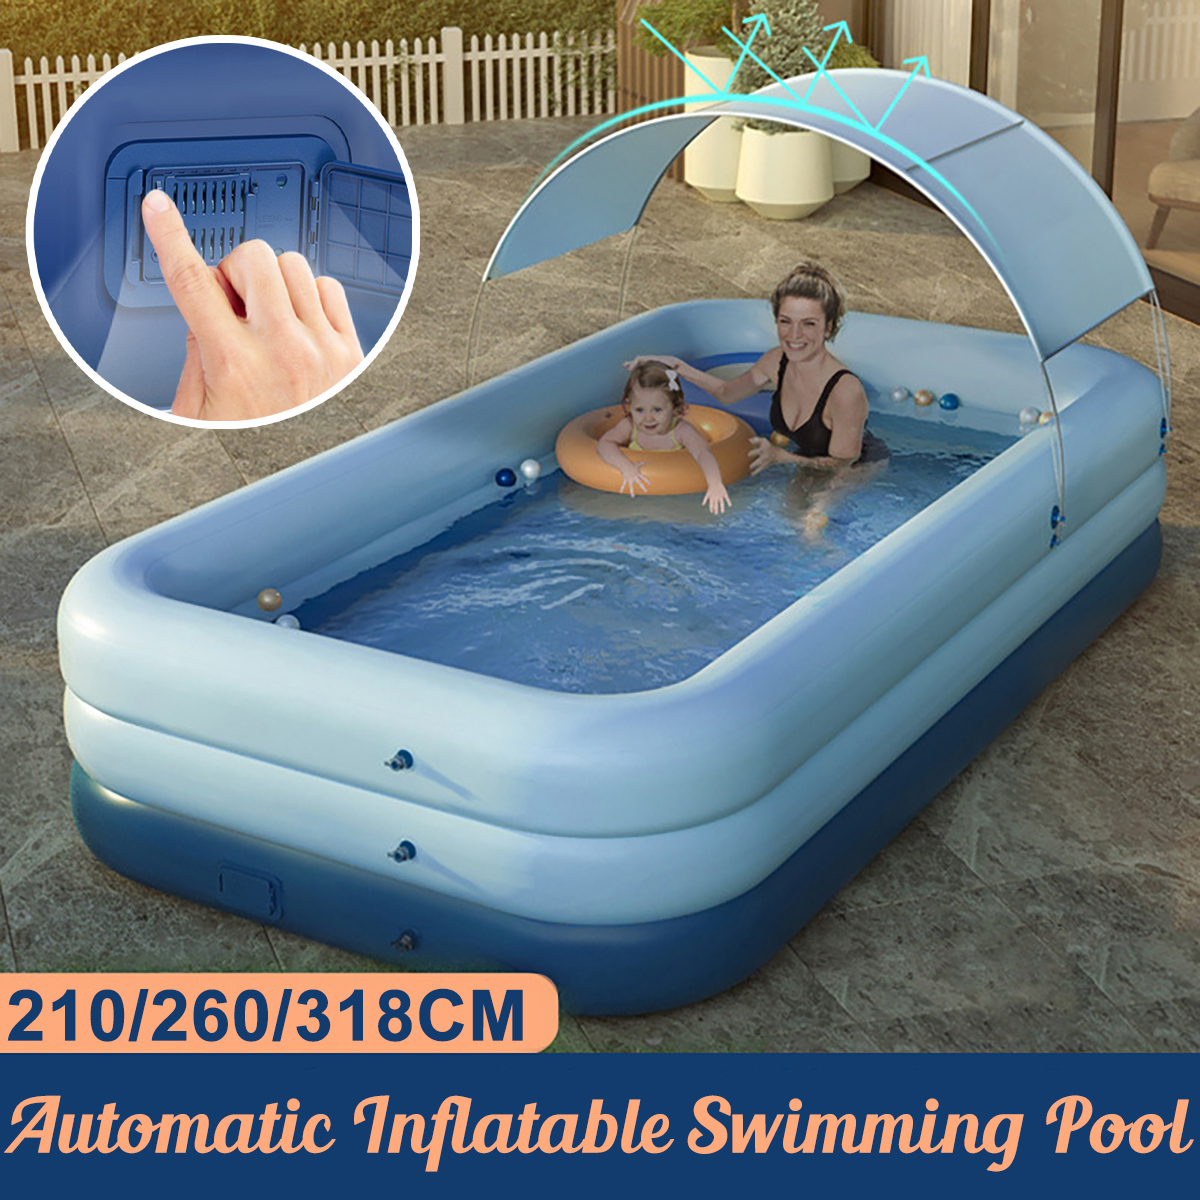 10Ft-Automatic-Inflatable-Swimming-Pool-Family-Bath-Pools-Paddling-Pools-with-Sunshade-Outdoor-Garde-1857043-1